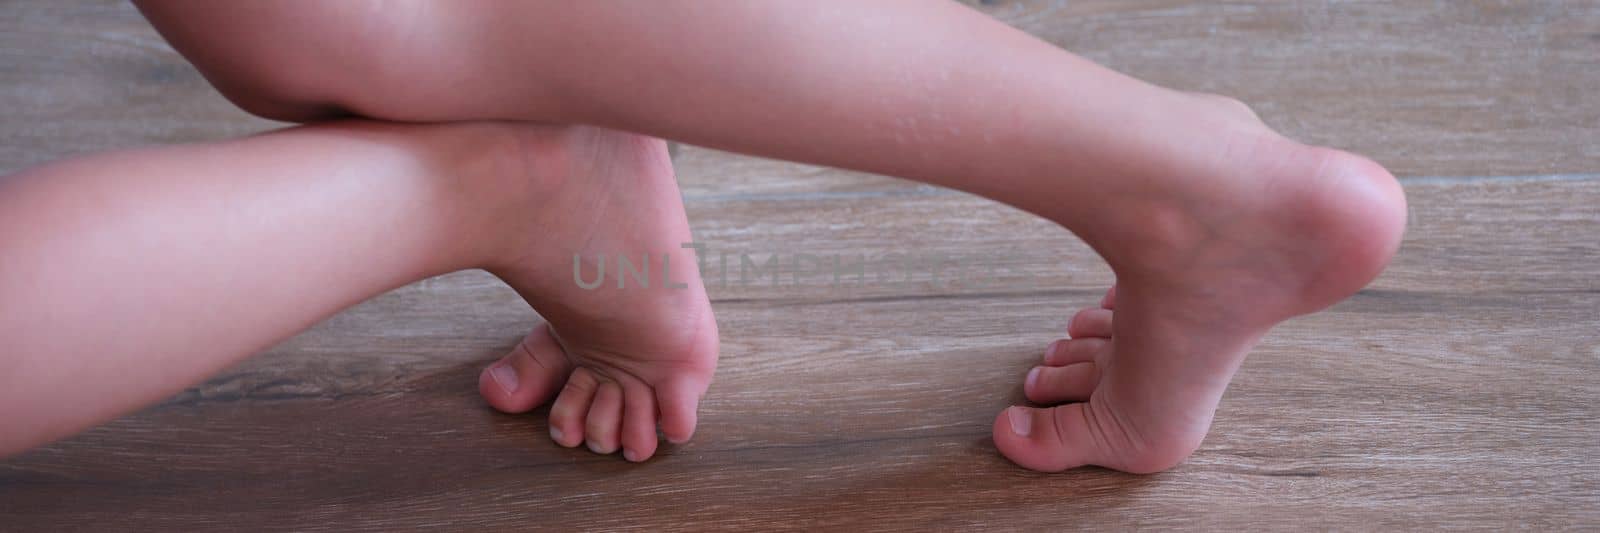 Children feet slide on wooden laminate at home closeup by kuprevich